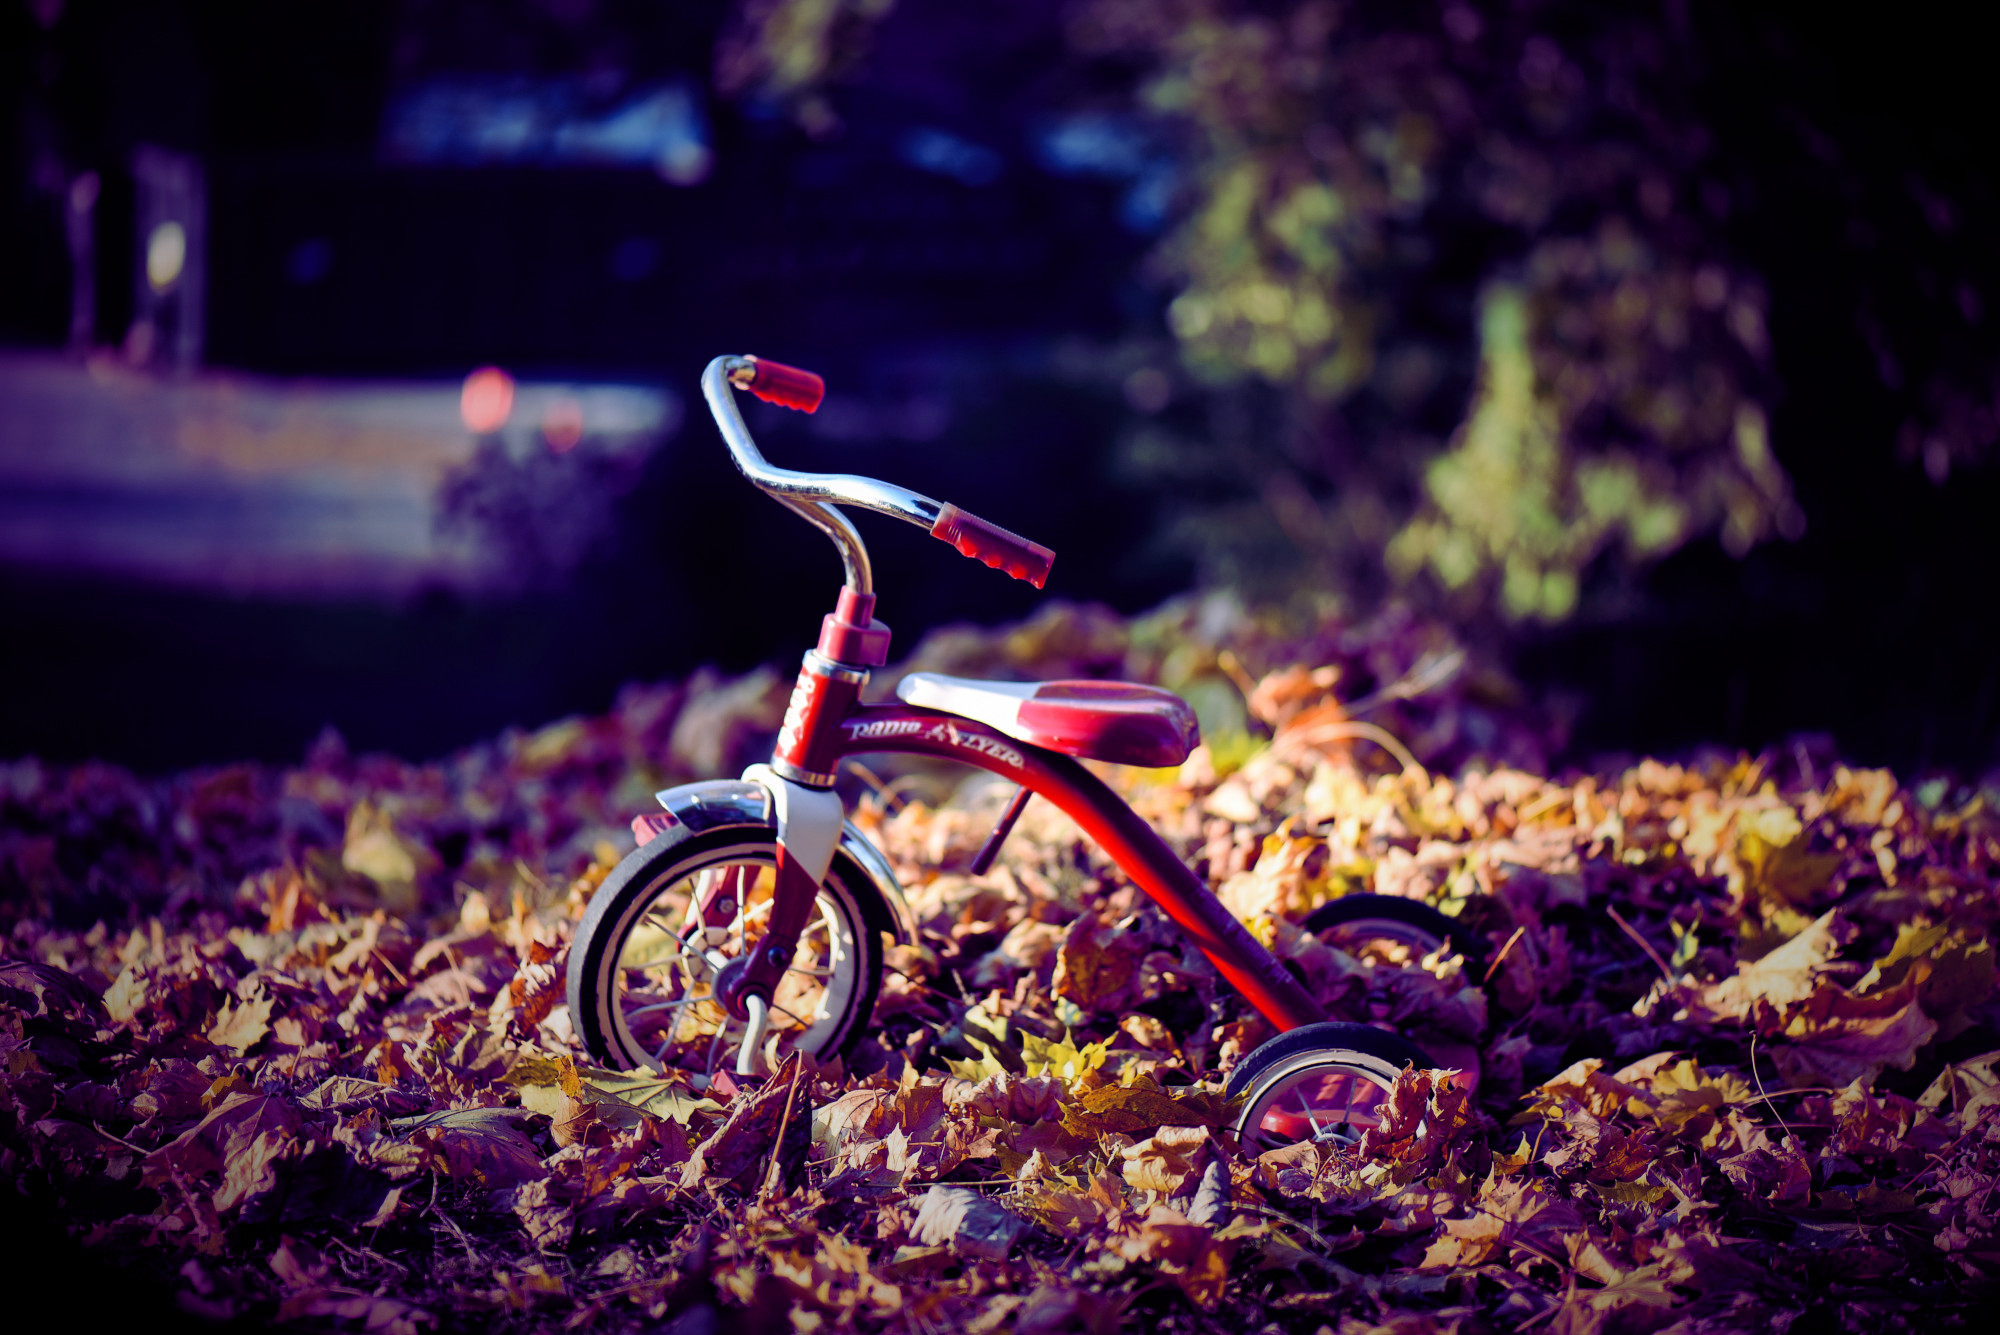 A tricycle in autumn leaves.